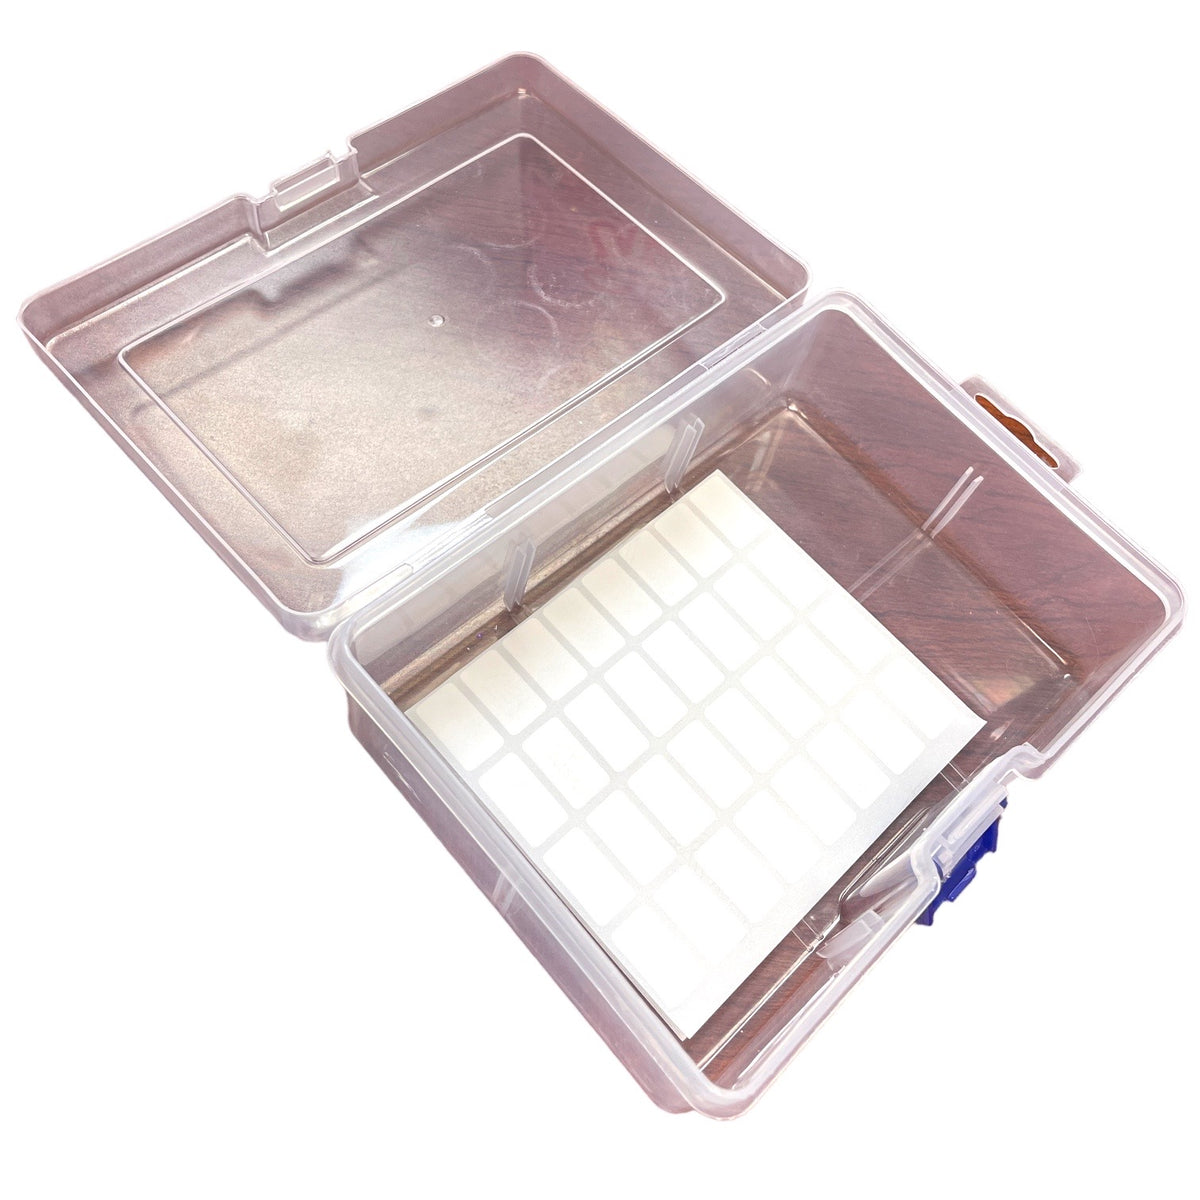 Claynation 24 Clay Kit with FREE Tube Compartment Container Crafting Organizer Box